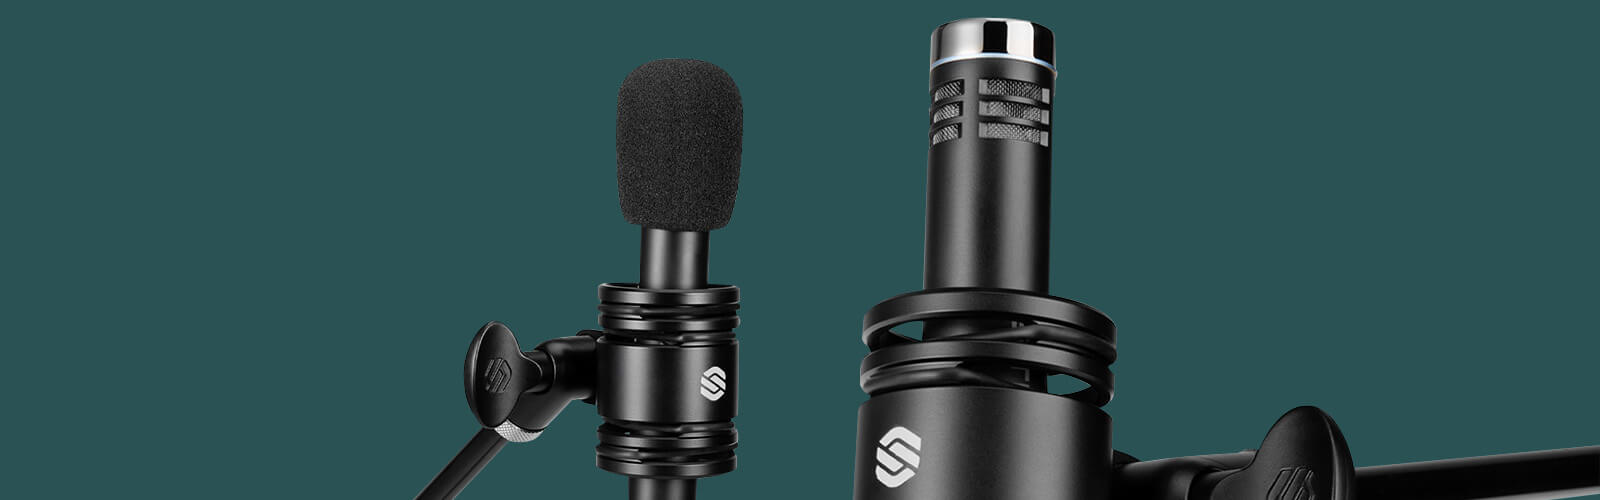 2 Sterling SL230MP Condenser Microphones On Green Background